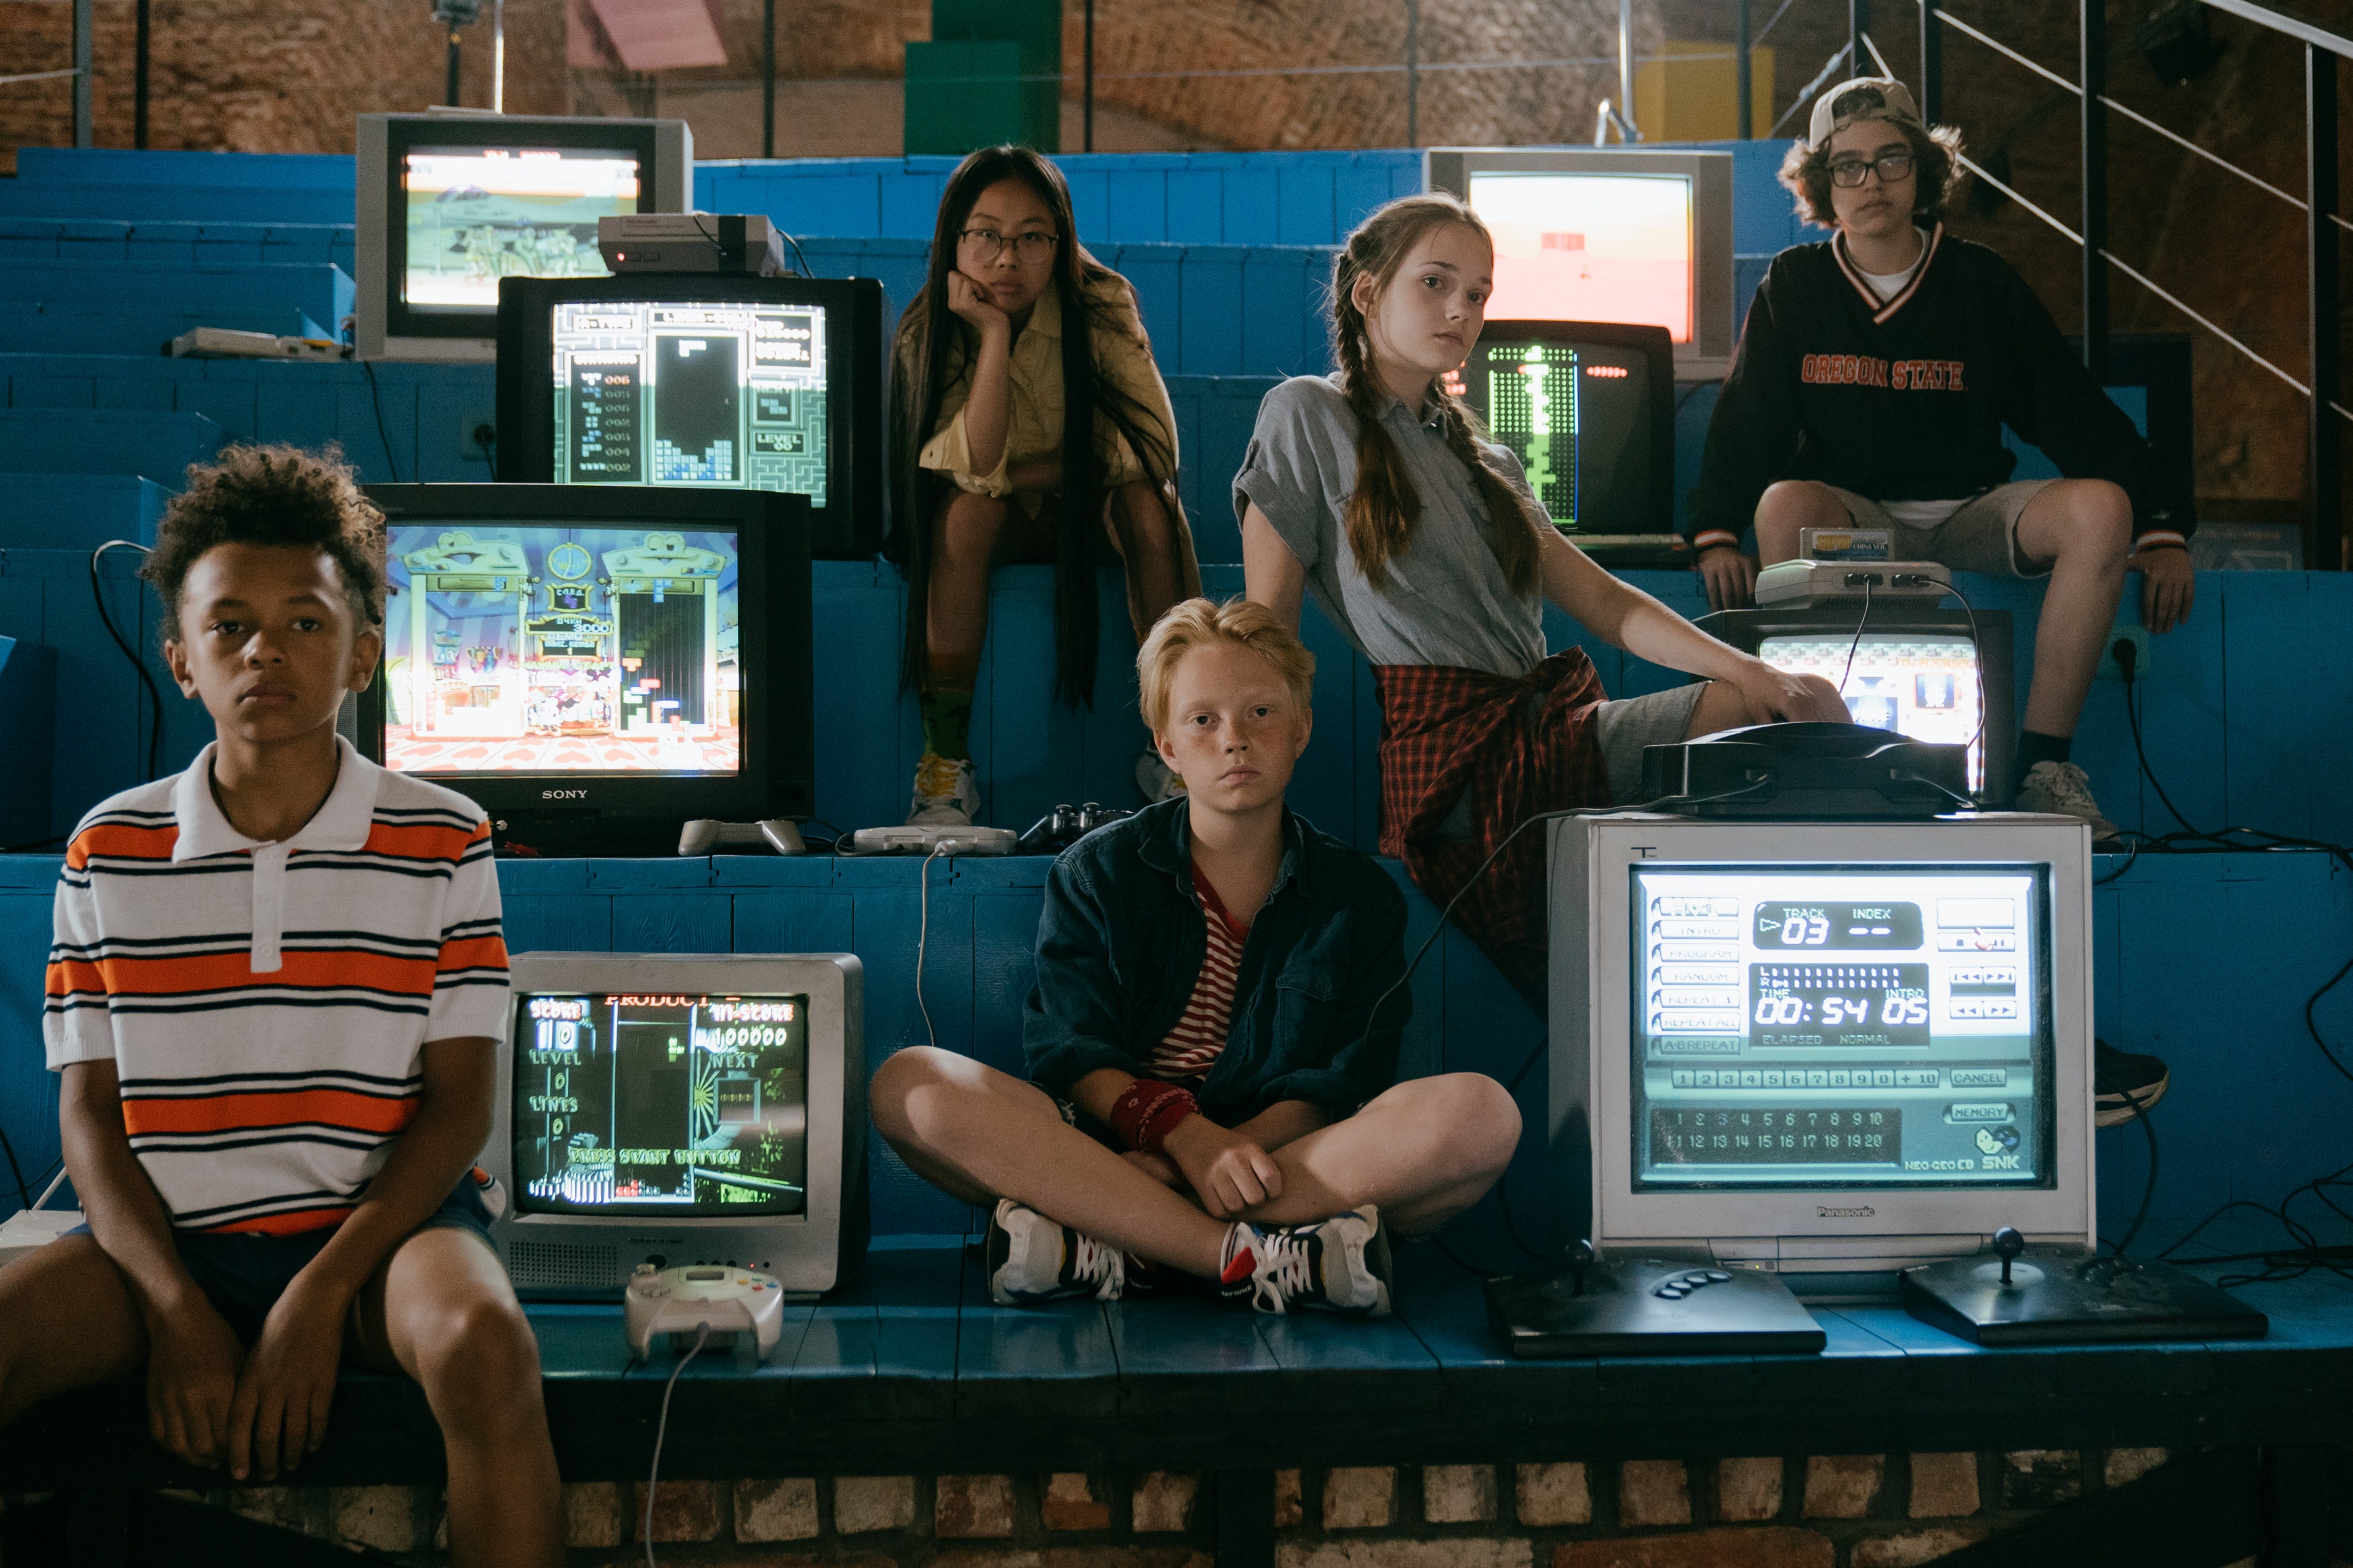 group of teens sitting next to several computers.